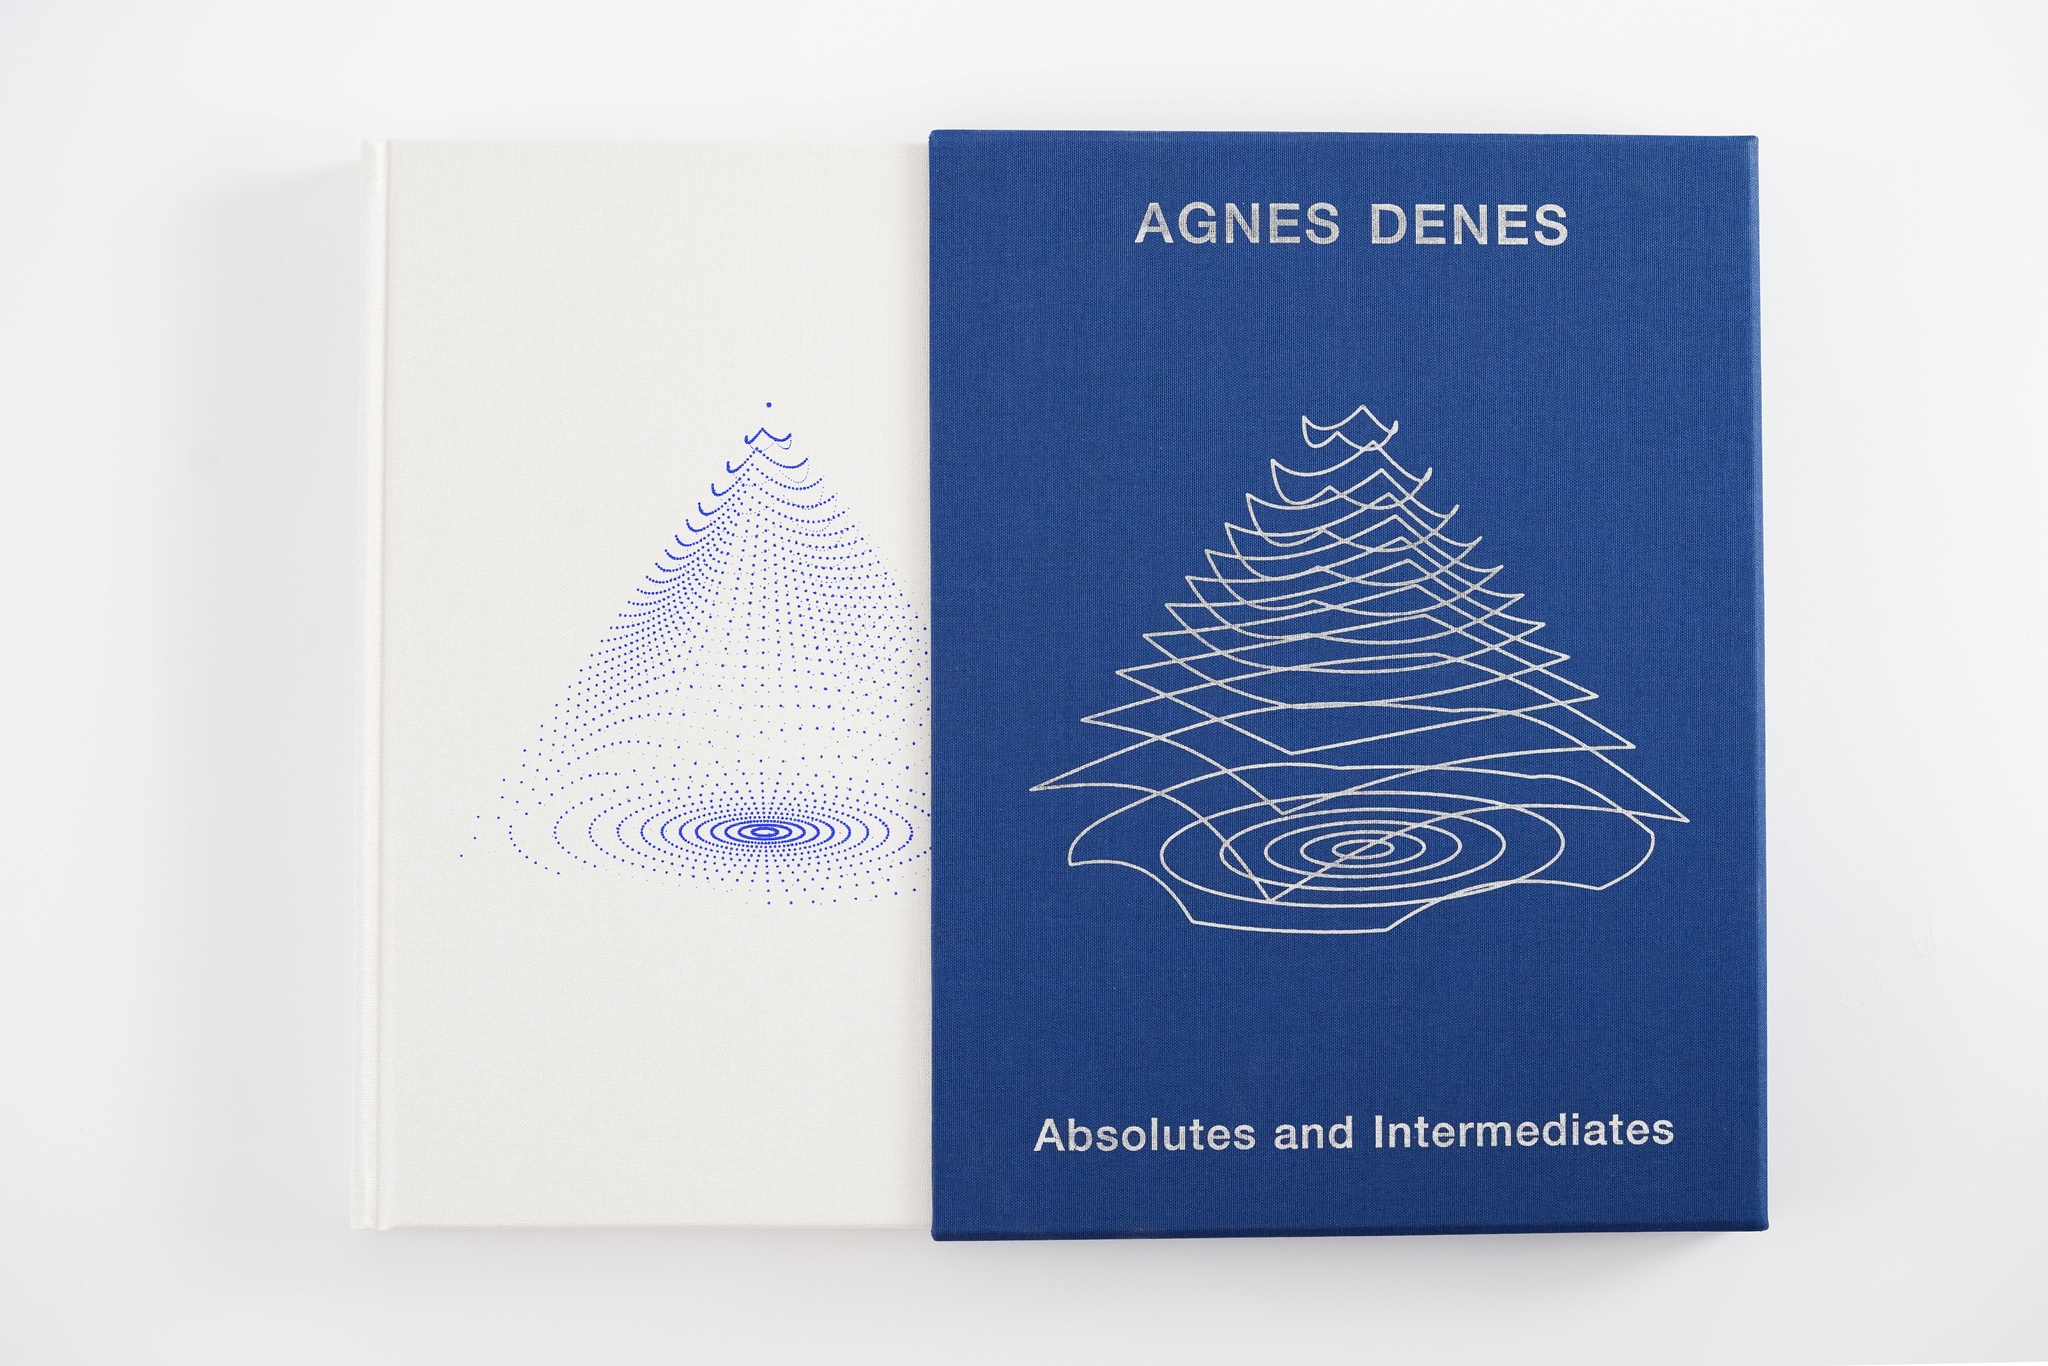 A white book halfway out of a blue slipcase decorated with a pyramid form